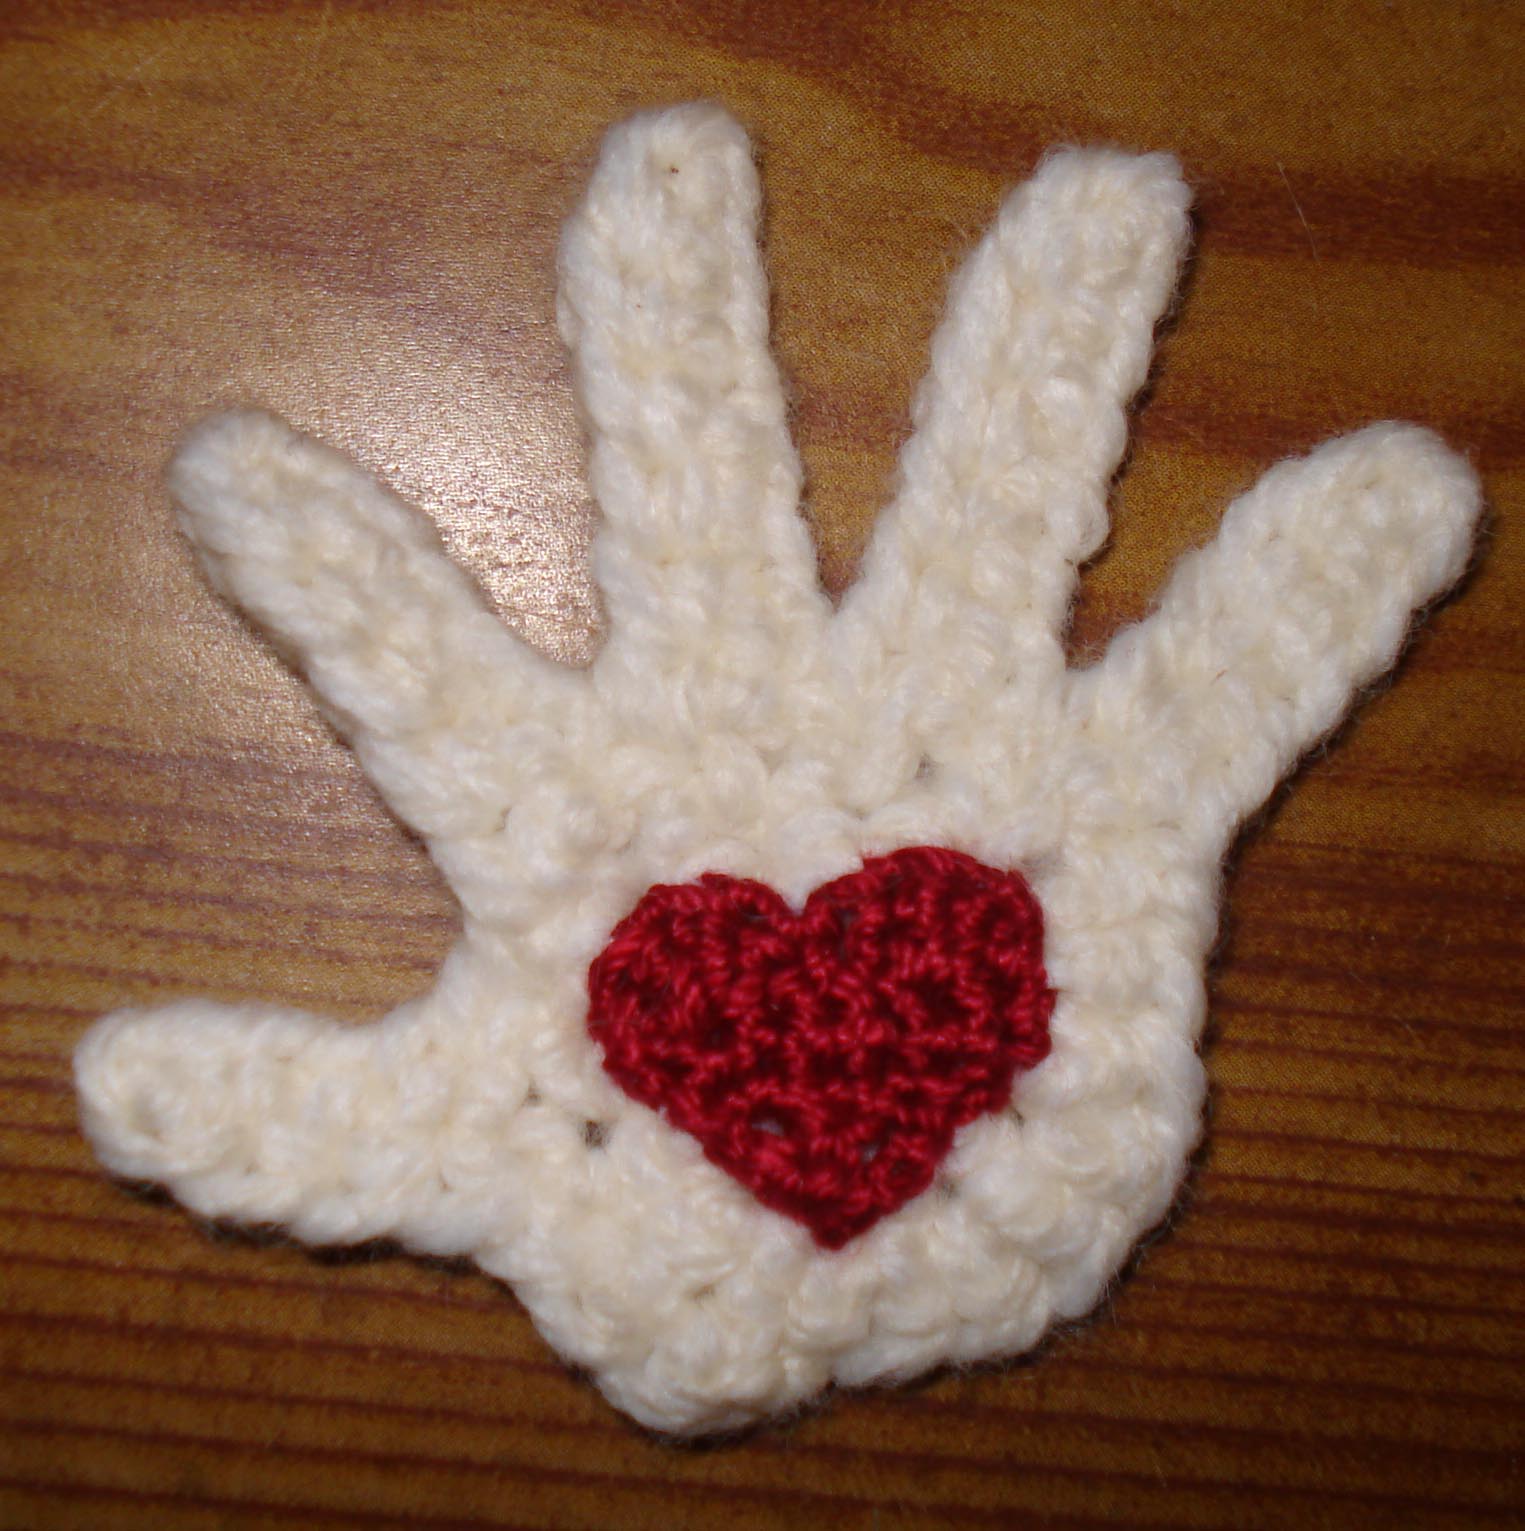 Crocheted hand with heart